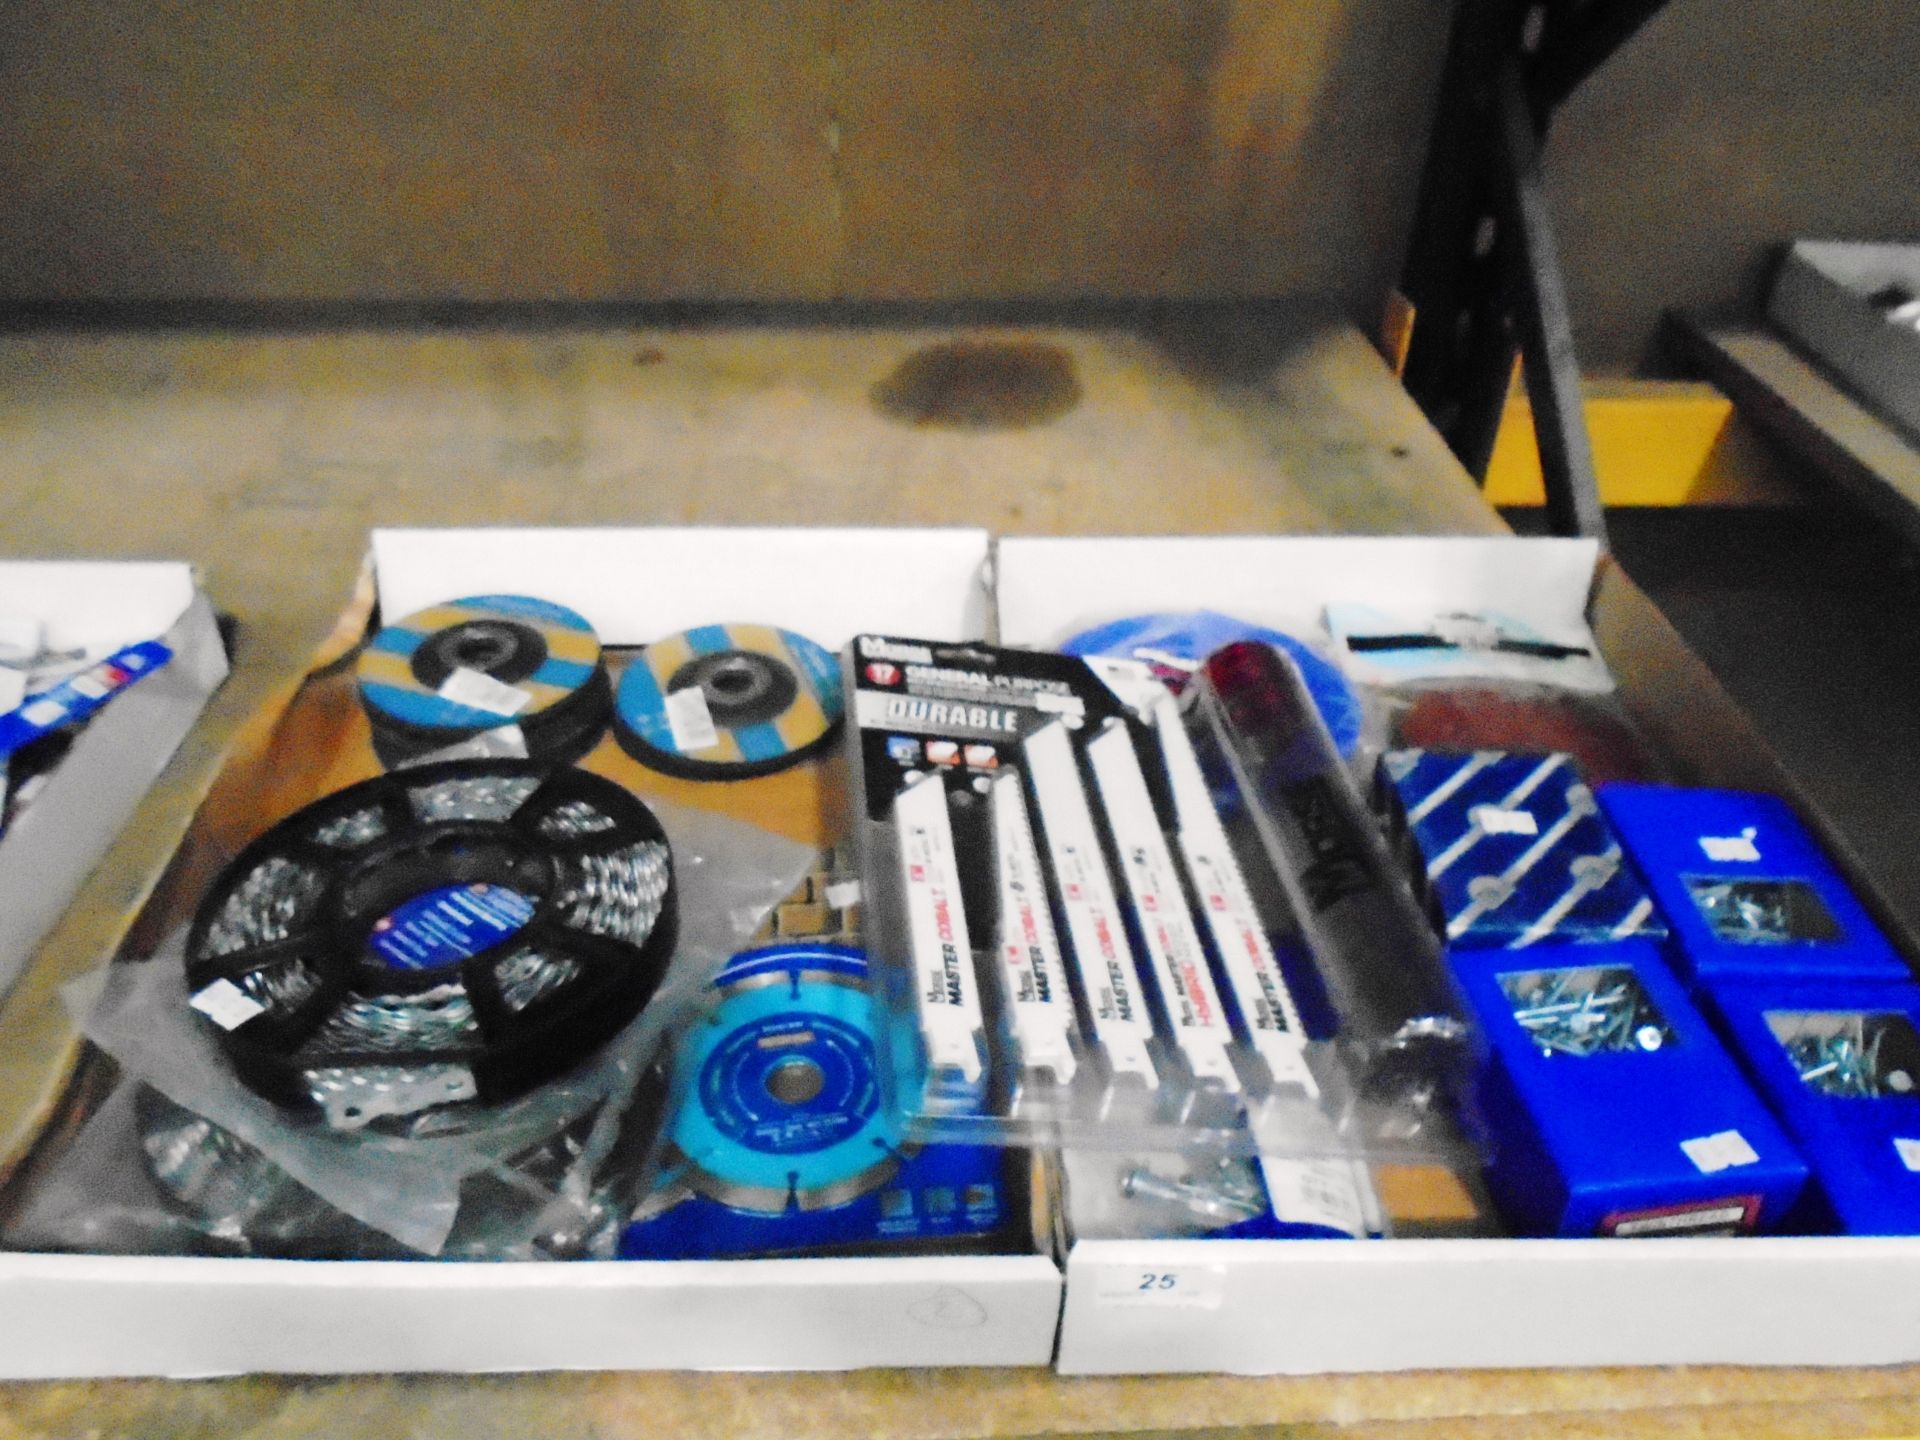 Contents to two trays - pack of Morse reciprocating saw blades, packs of countersunk pozi screws,